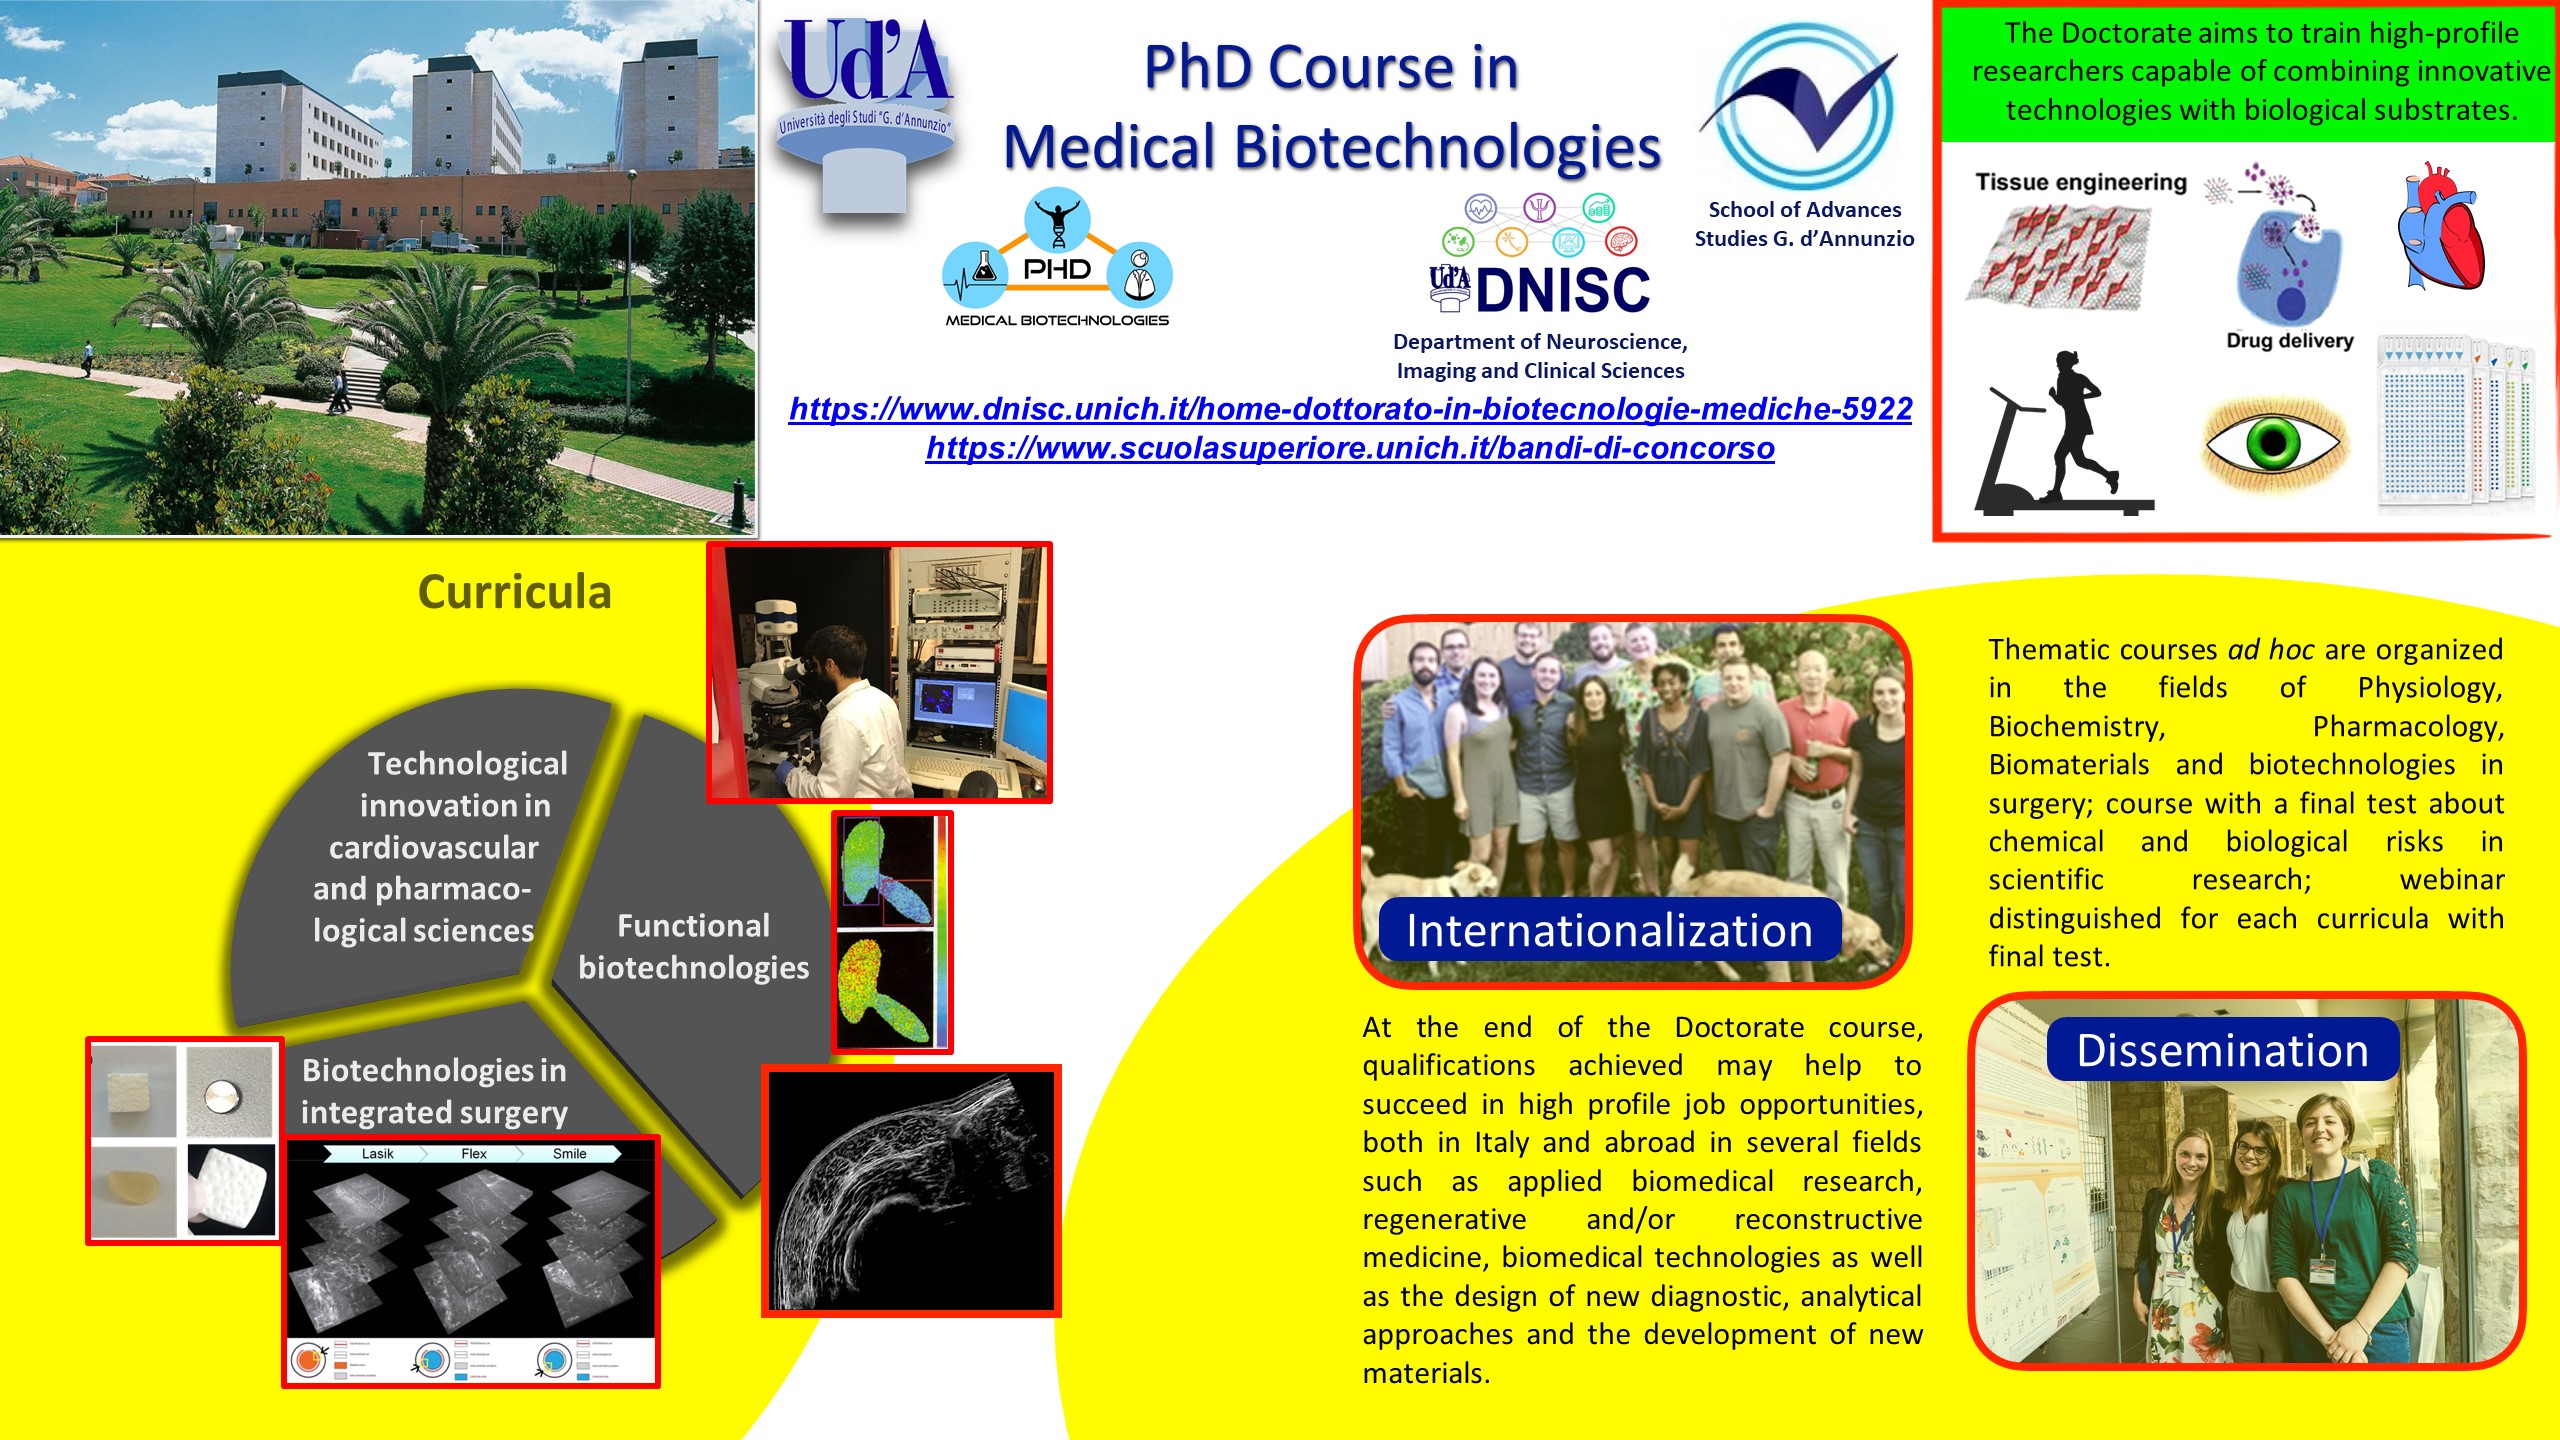 PhD Course in Medical Biotechnologies